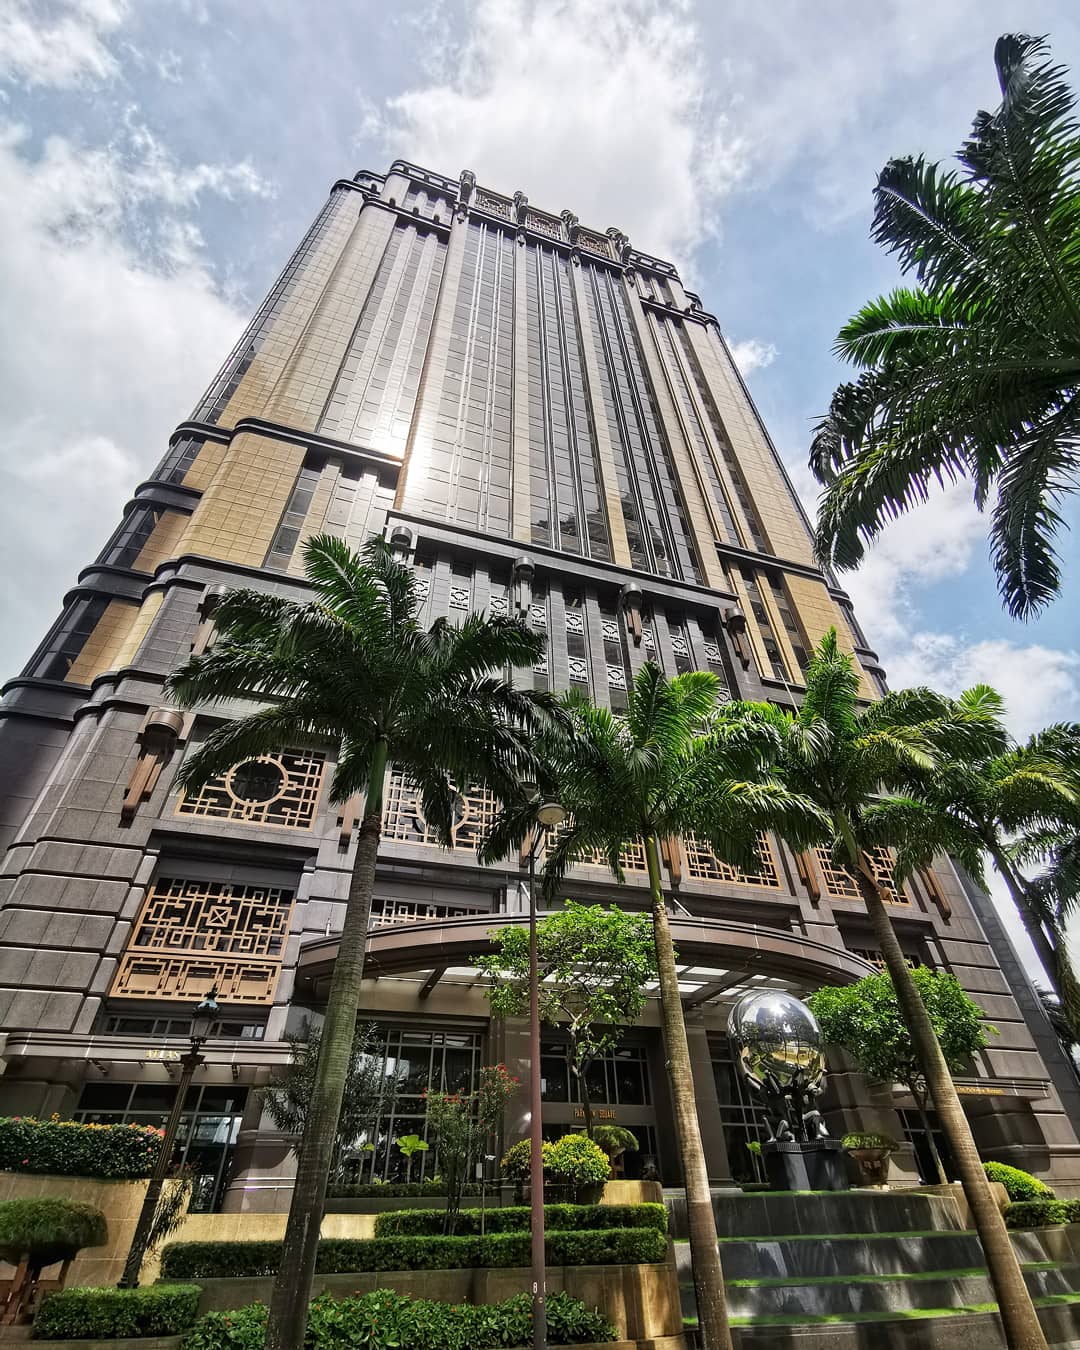 feng shui places in singapore - parkview square